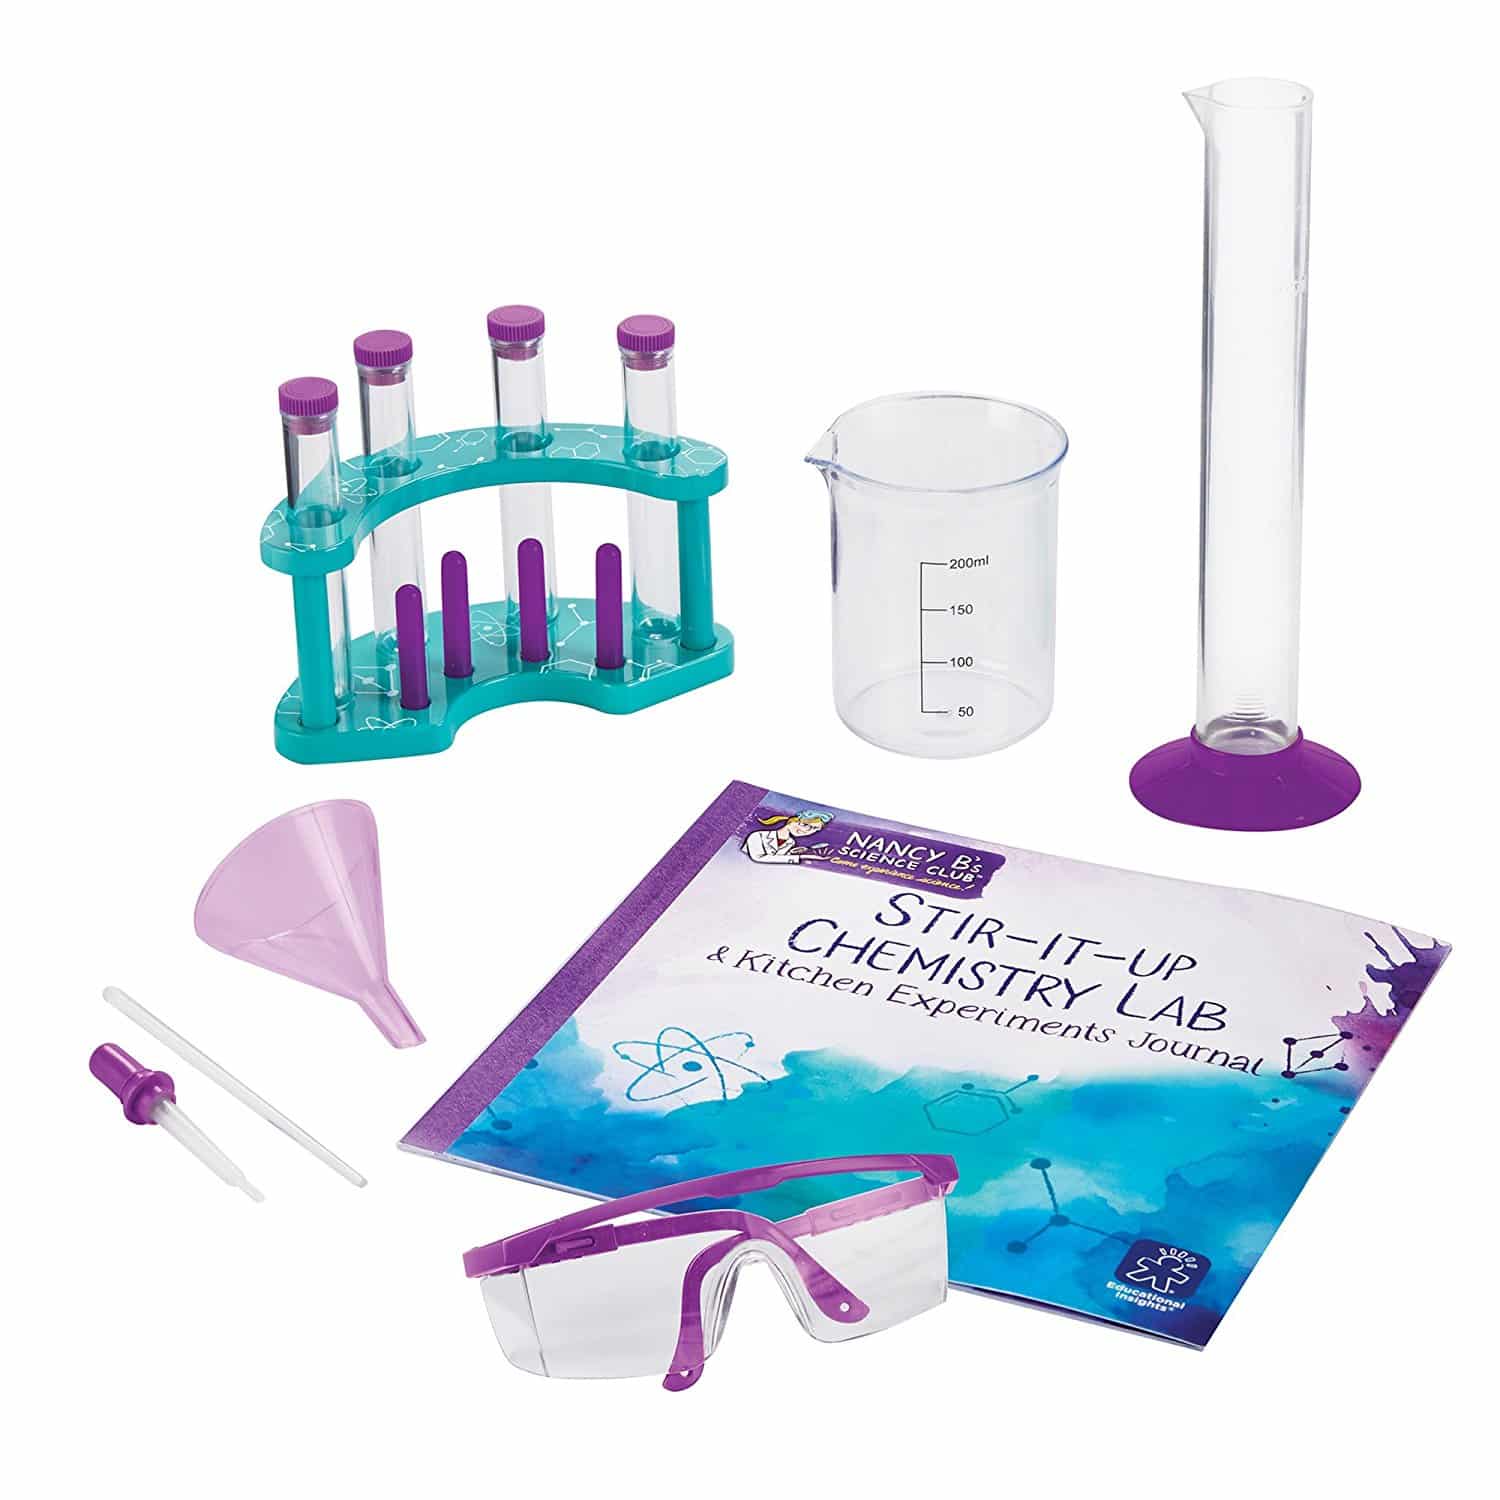 DEAL ALERT: Educational Insights Nancy B’s Science Club Stir-It-Up Chemistry Lab & Kitchen Experiments Journal 36% off